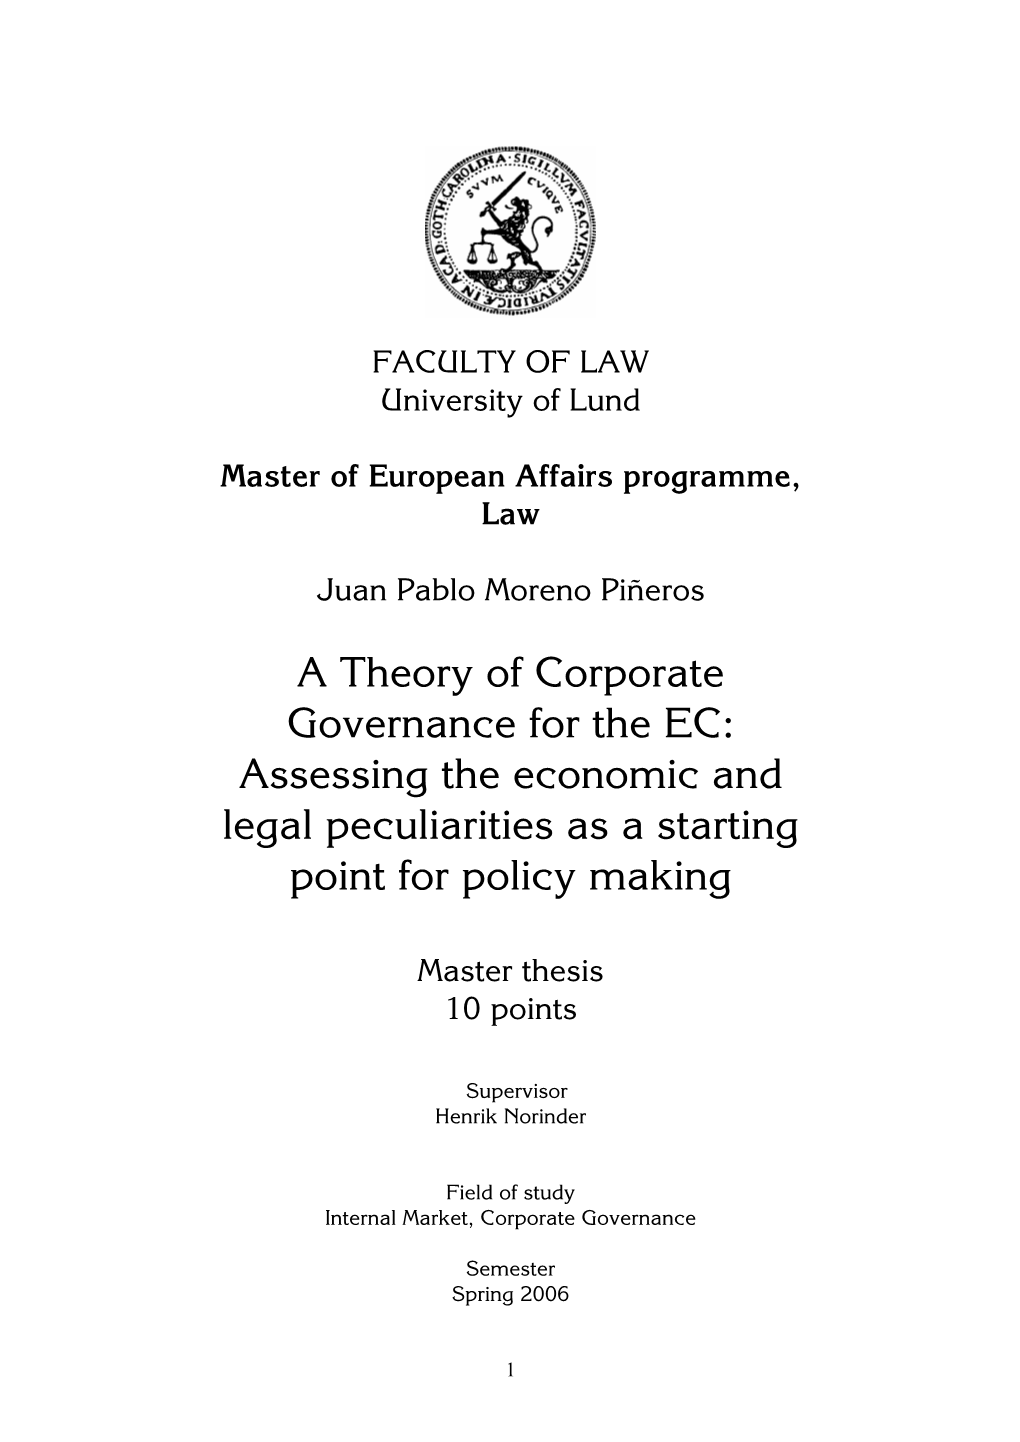 A Theory of Corporate Governance for the EC: Assessing the Economic and Legal Peculiarities As a Starting Point for Policy Making